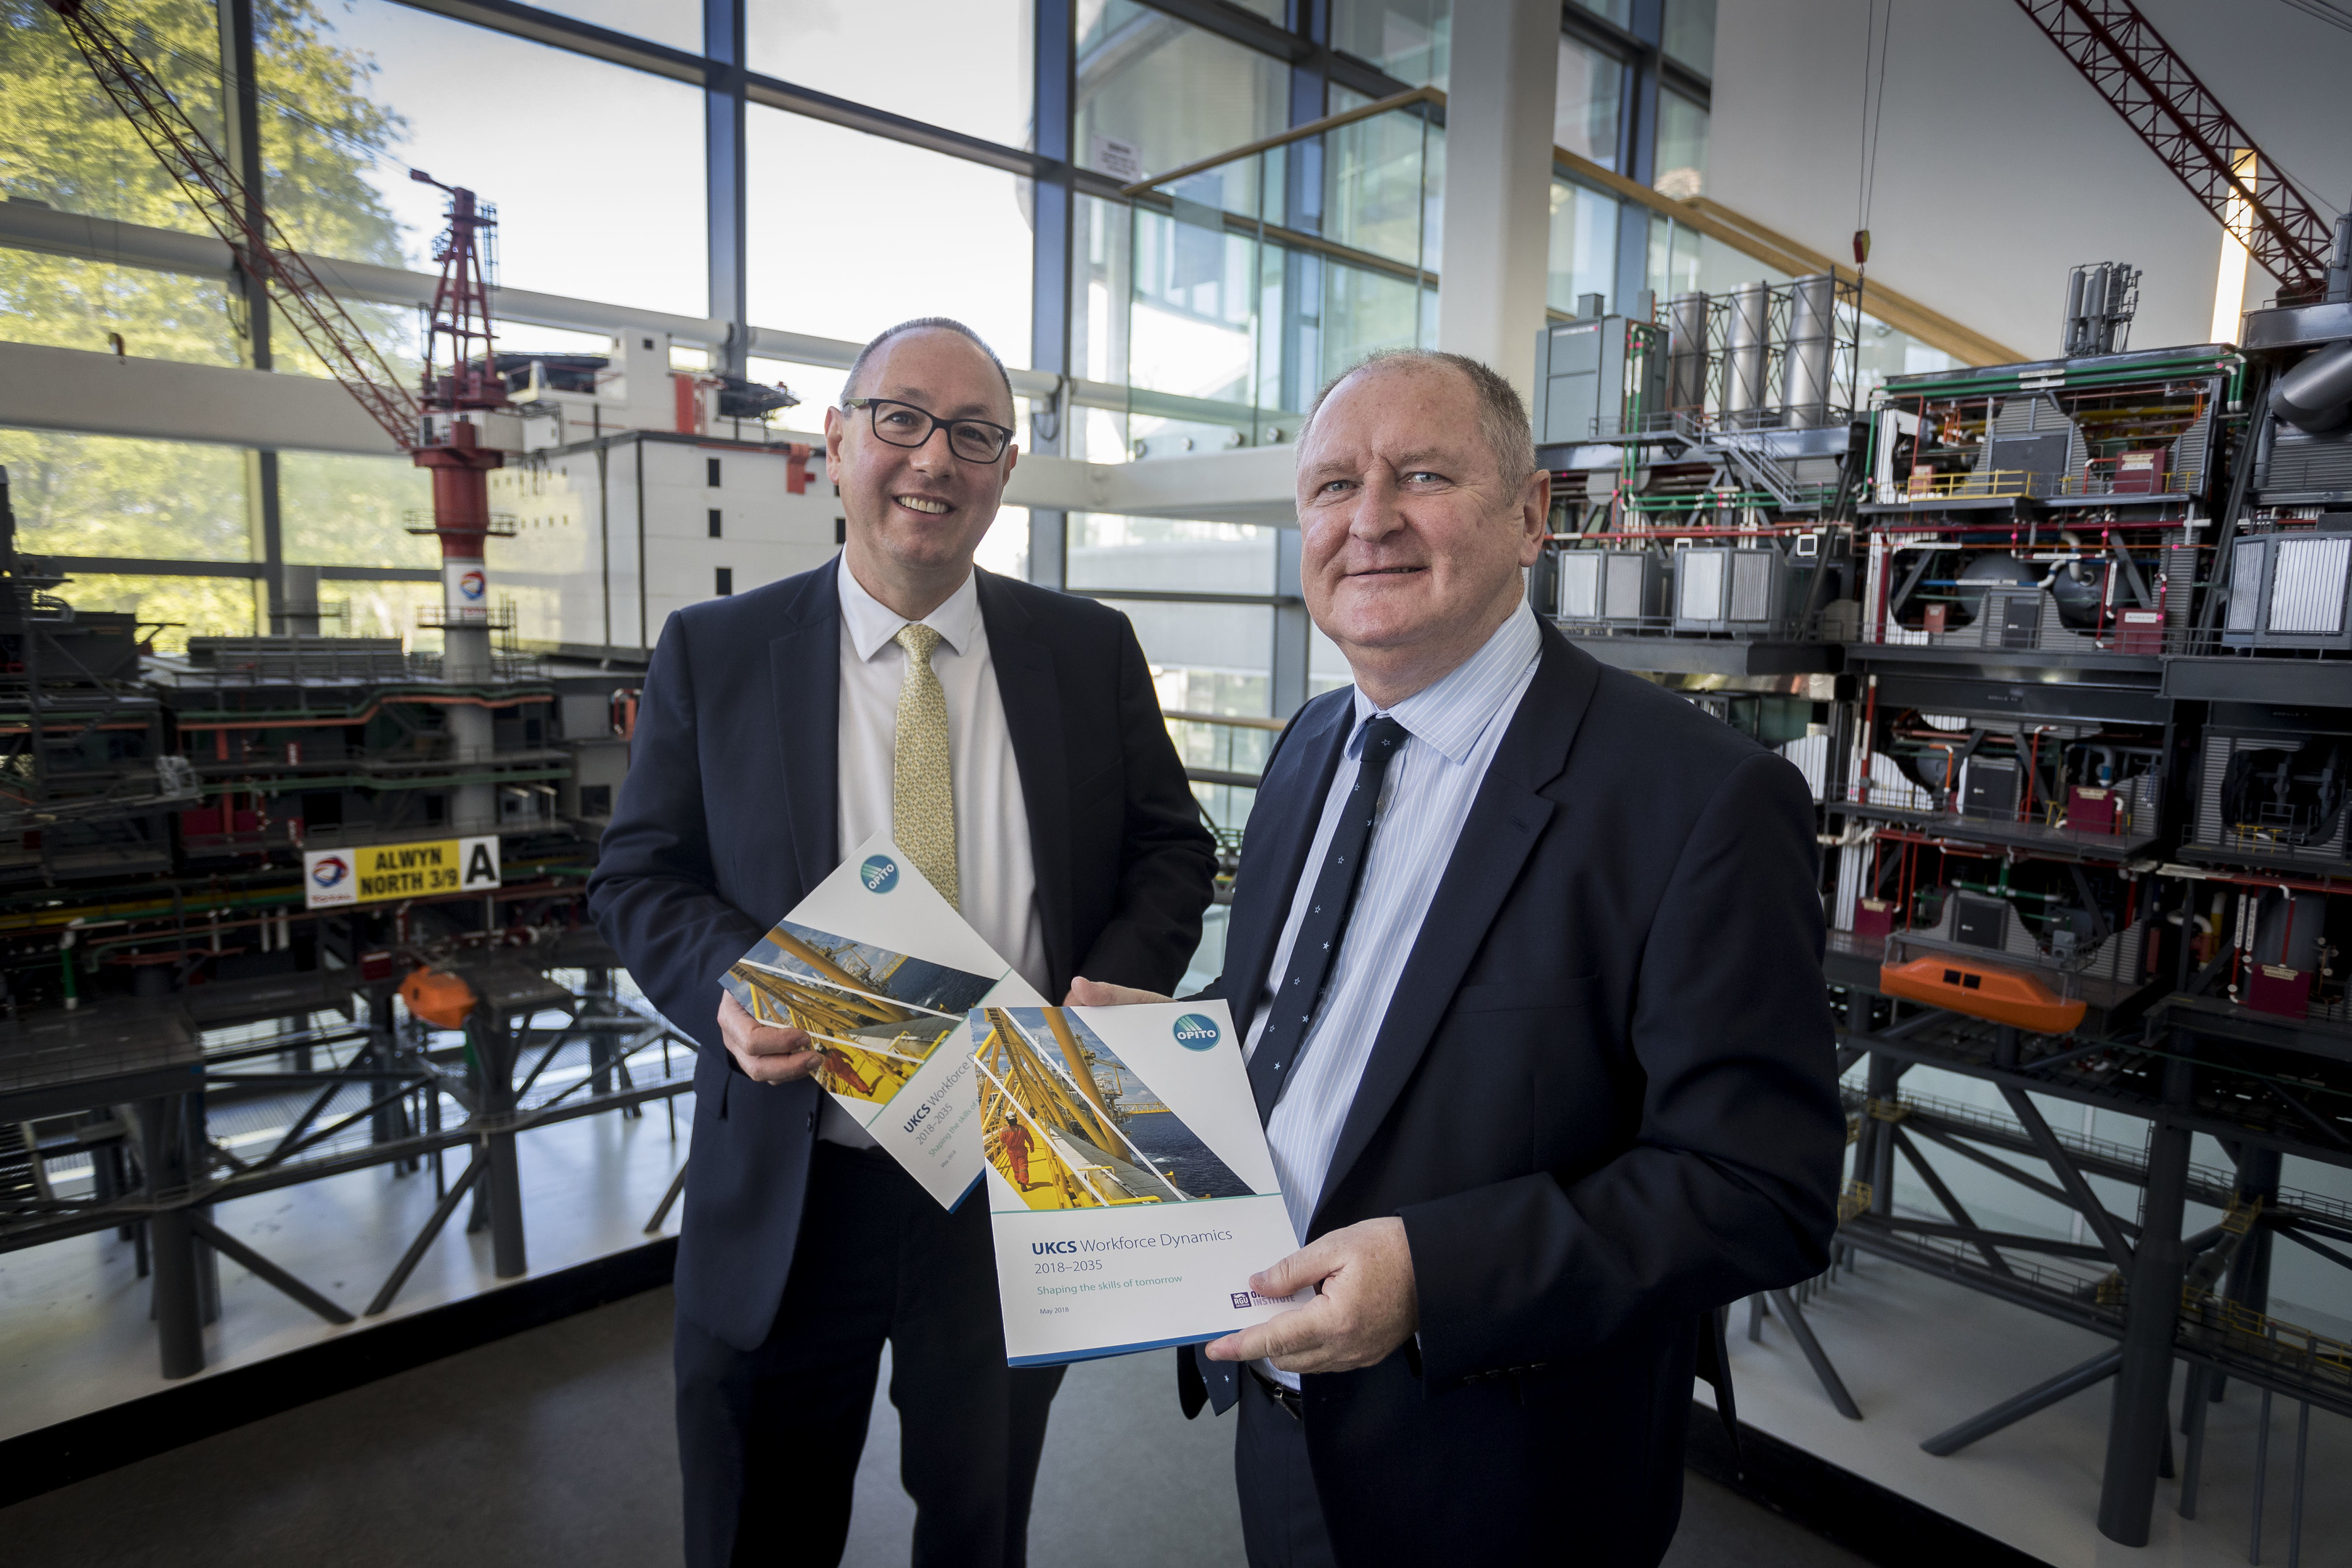 Professor Paul de Leeuw and John McDonald at the launch of the review earlier this month.